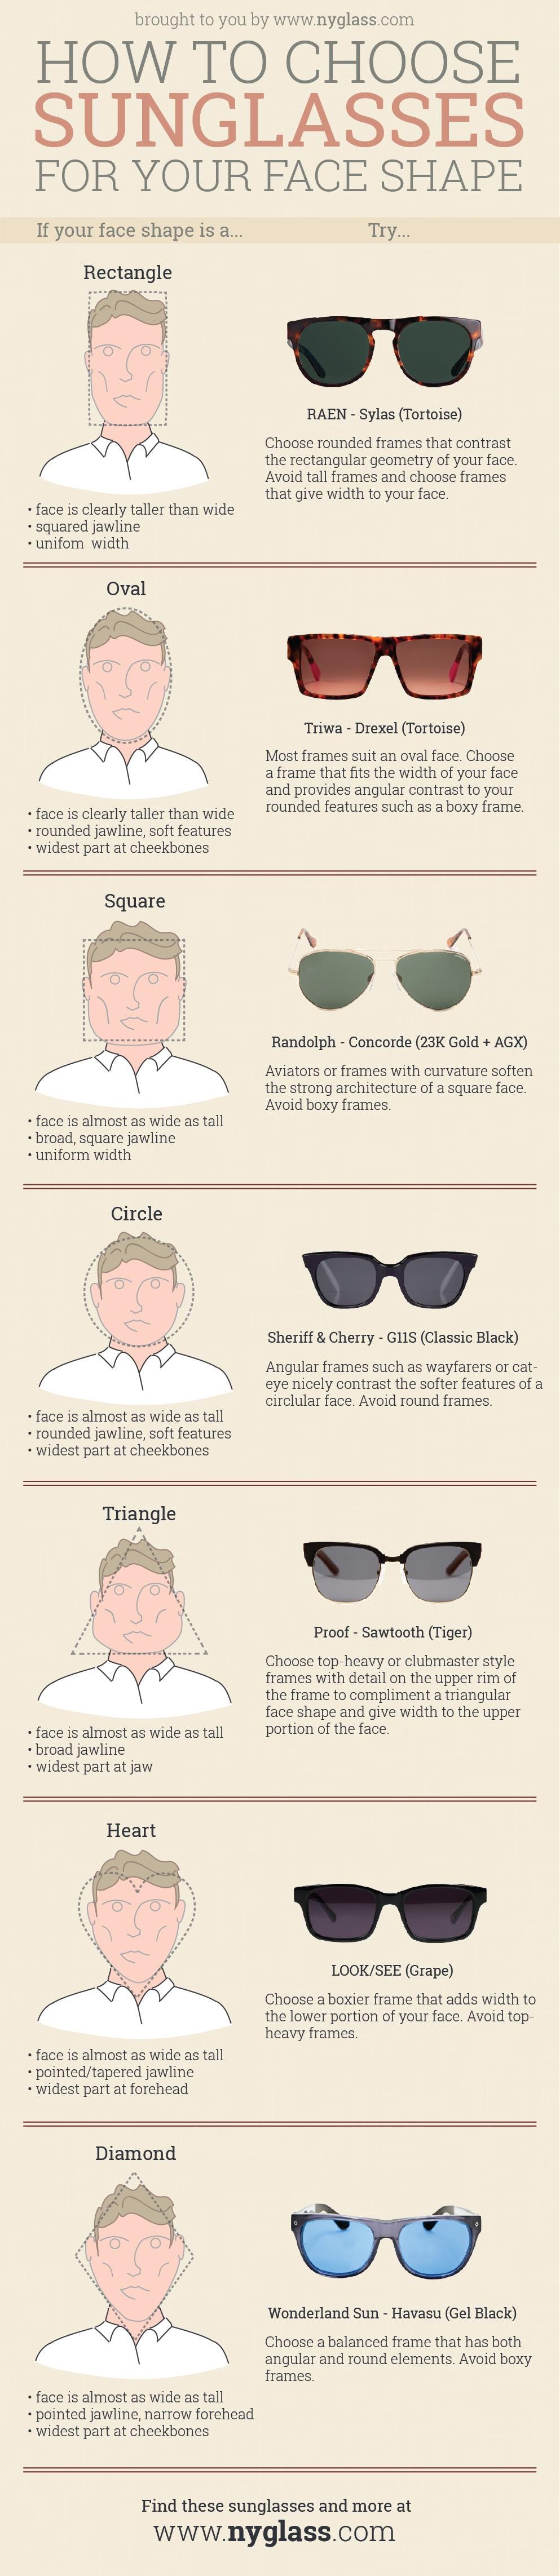 How to Choose Sunglasses for Your Face Shape | by NYGlass.com | Medium